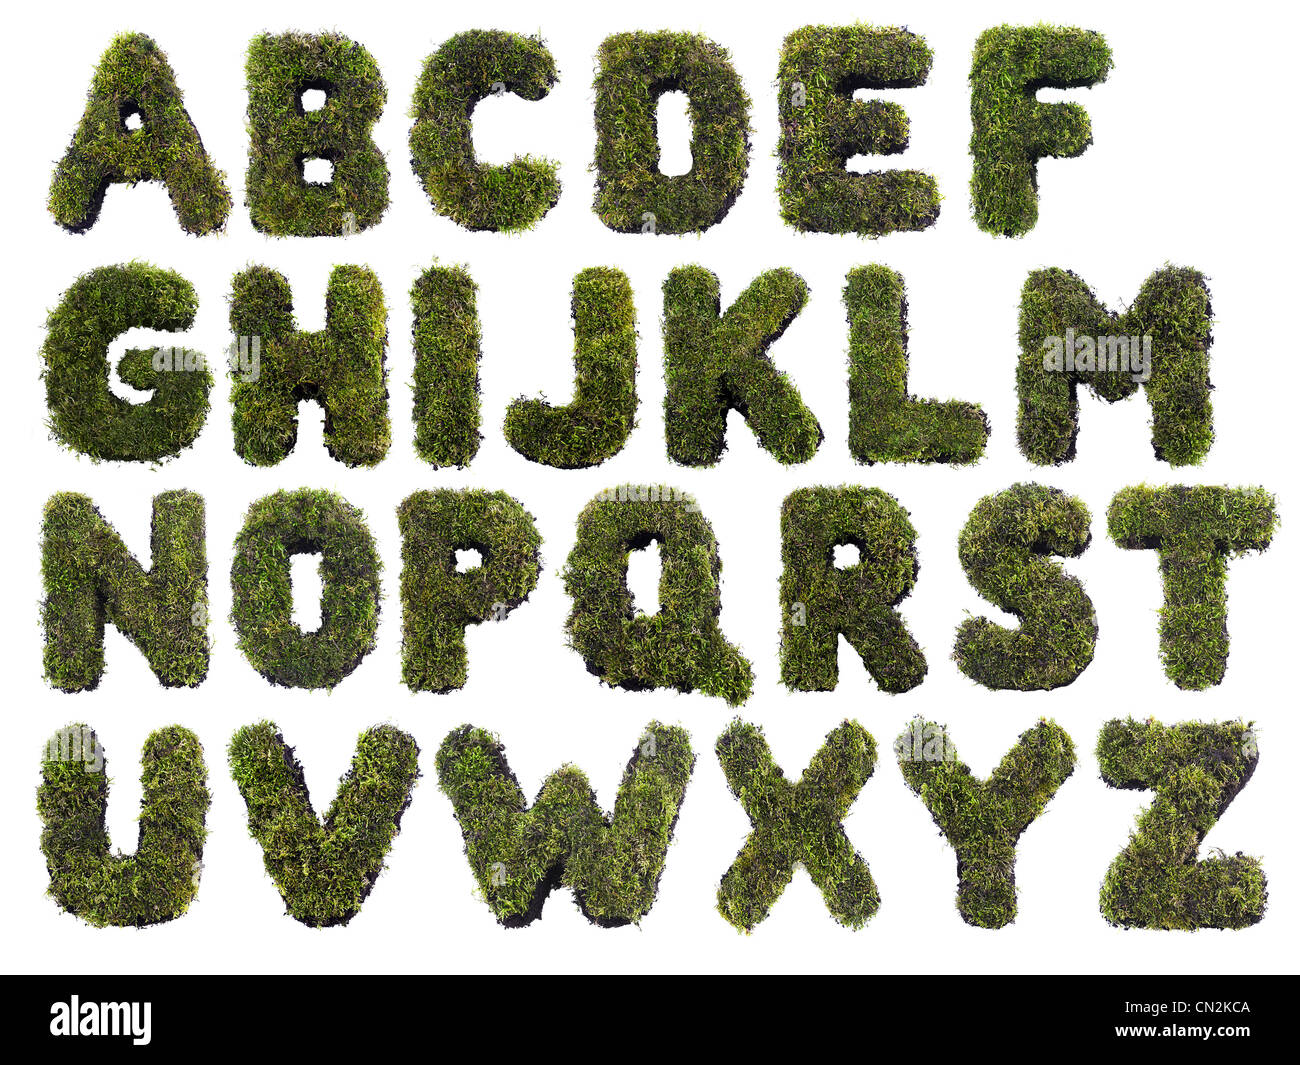 Latin alphabet letters made from grass on white Stock Photo